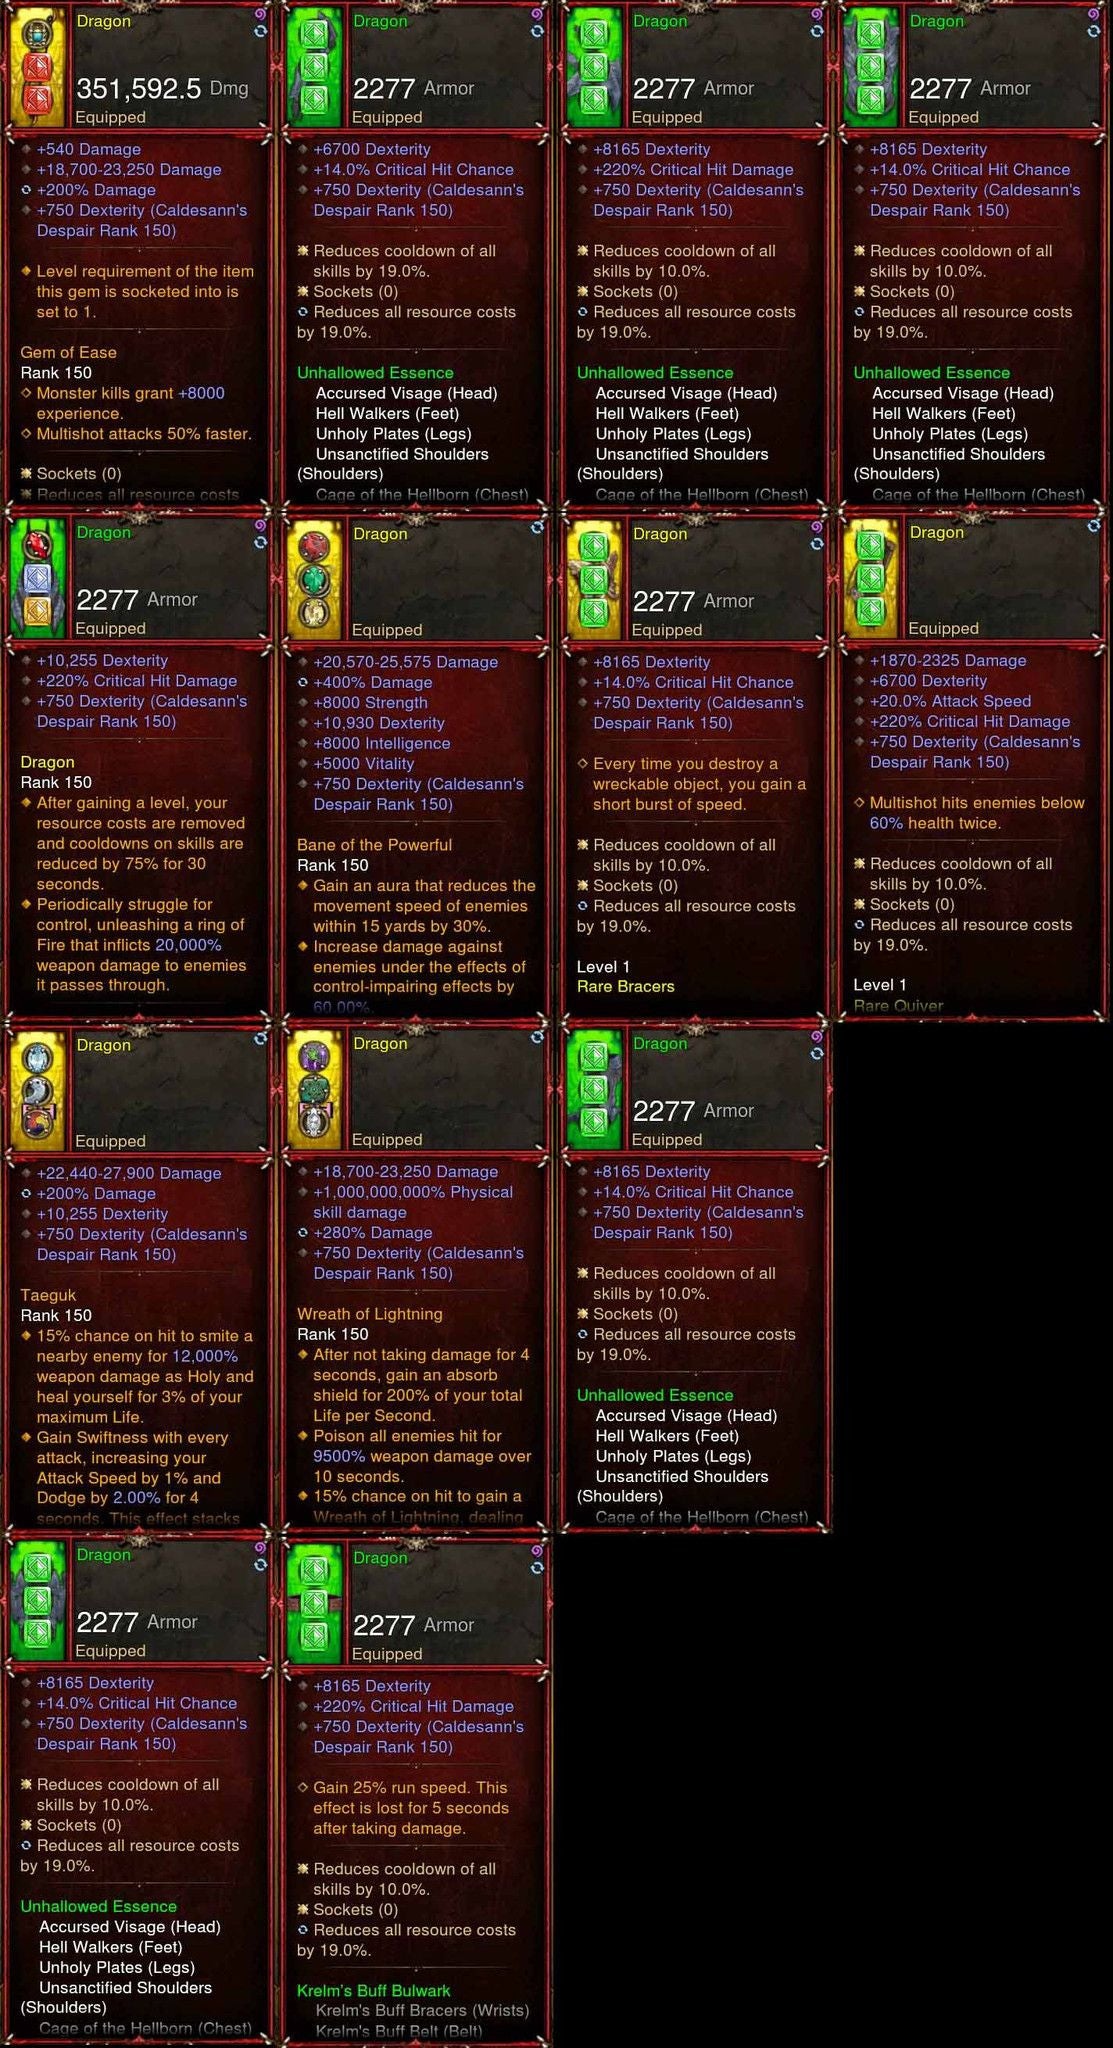 [Primal Ancient] Diablo 3 Immortal v3 Unhallow Demon Hunter Dragon Level 1-70 Diablo 3 Mods ROS Seasonal and Non Seasonal Save Mod - Modded Items and Gear - Hacks - Cheats - Trainers for Playstation 4 - Playstation 5 - Nintendo Switch - Xbox One